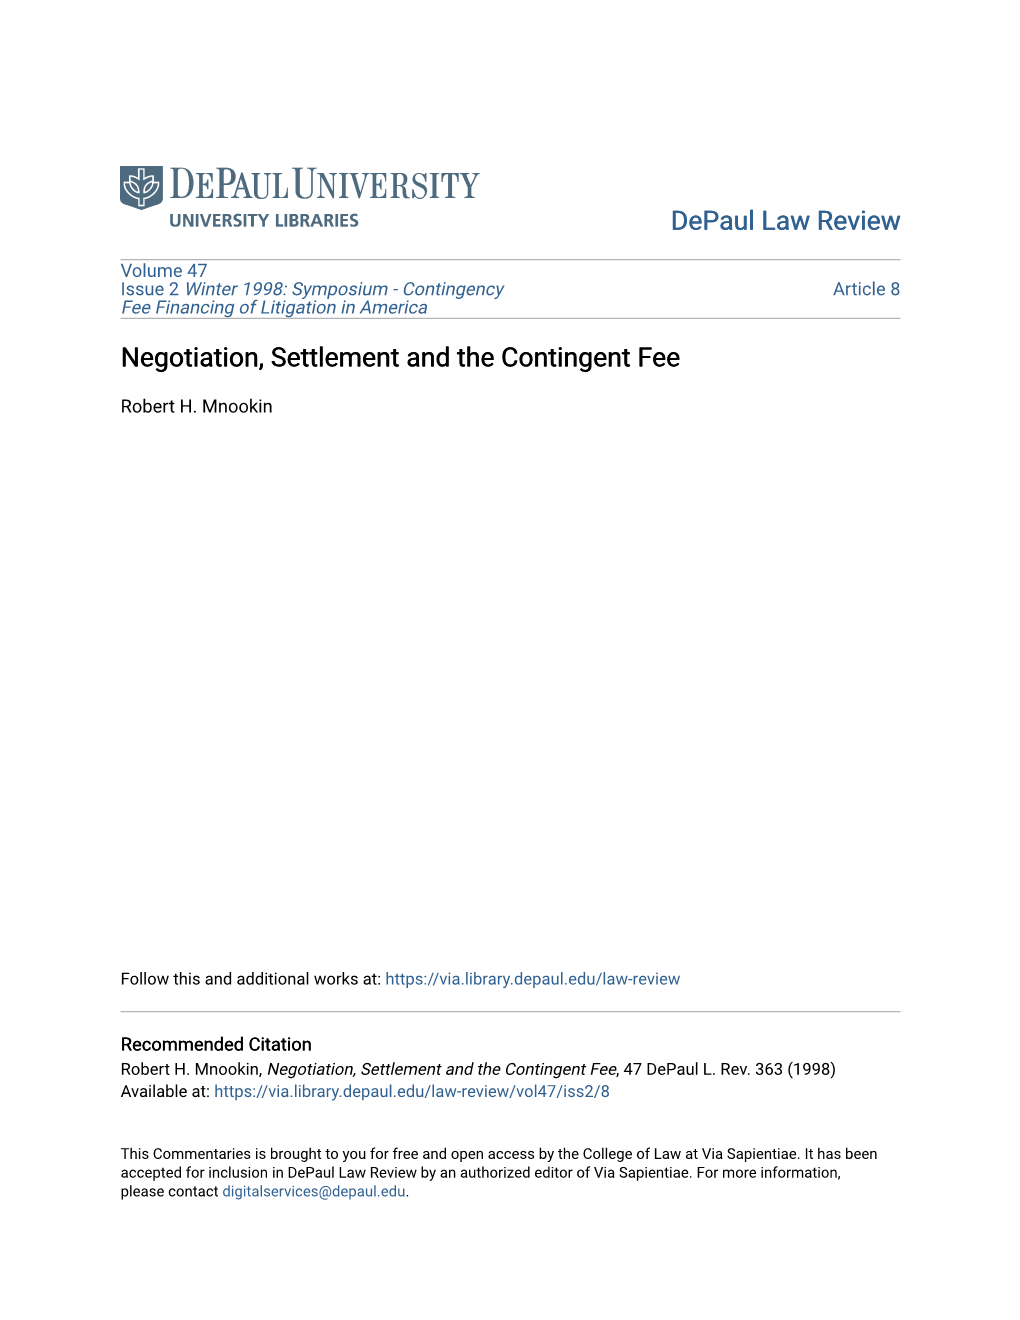 Negotiation, Settlement and the Contingent Fee